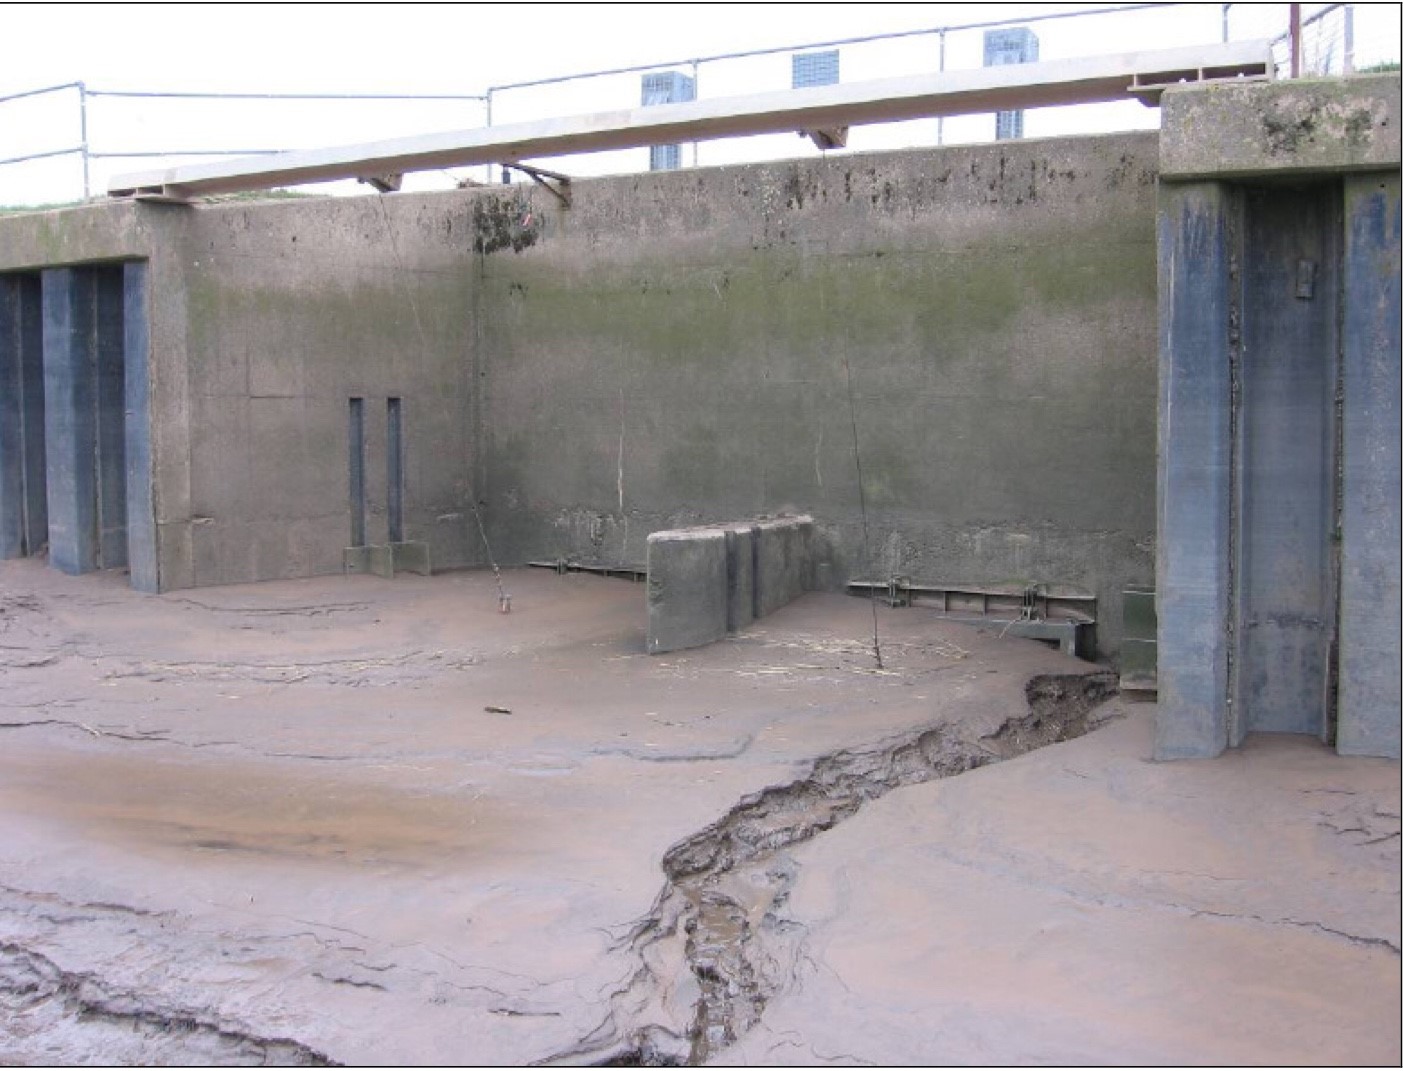 An image showing the outfalls to the river trent completely blocked with silt.